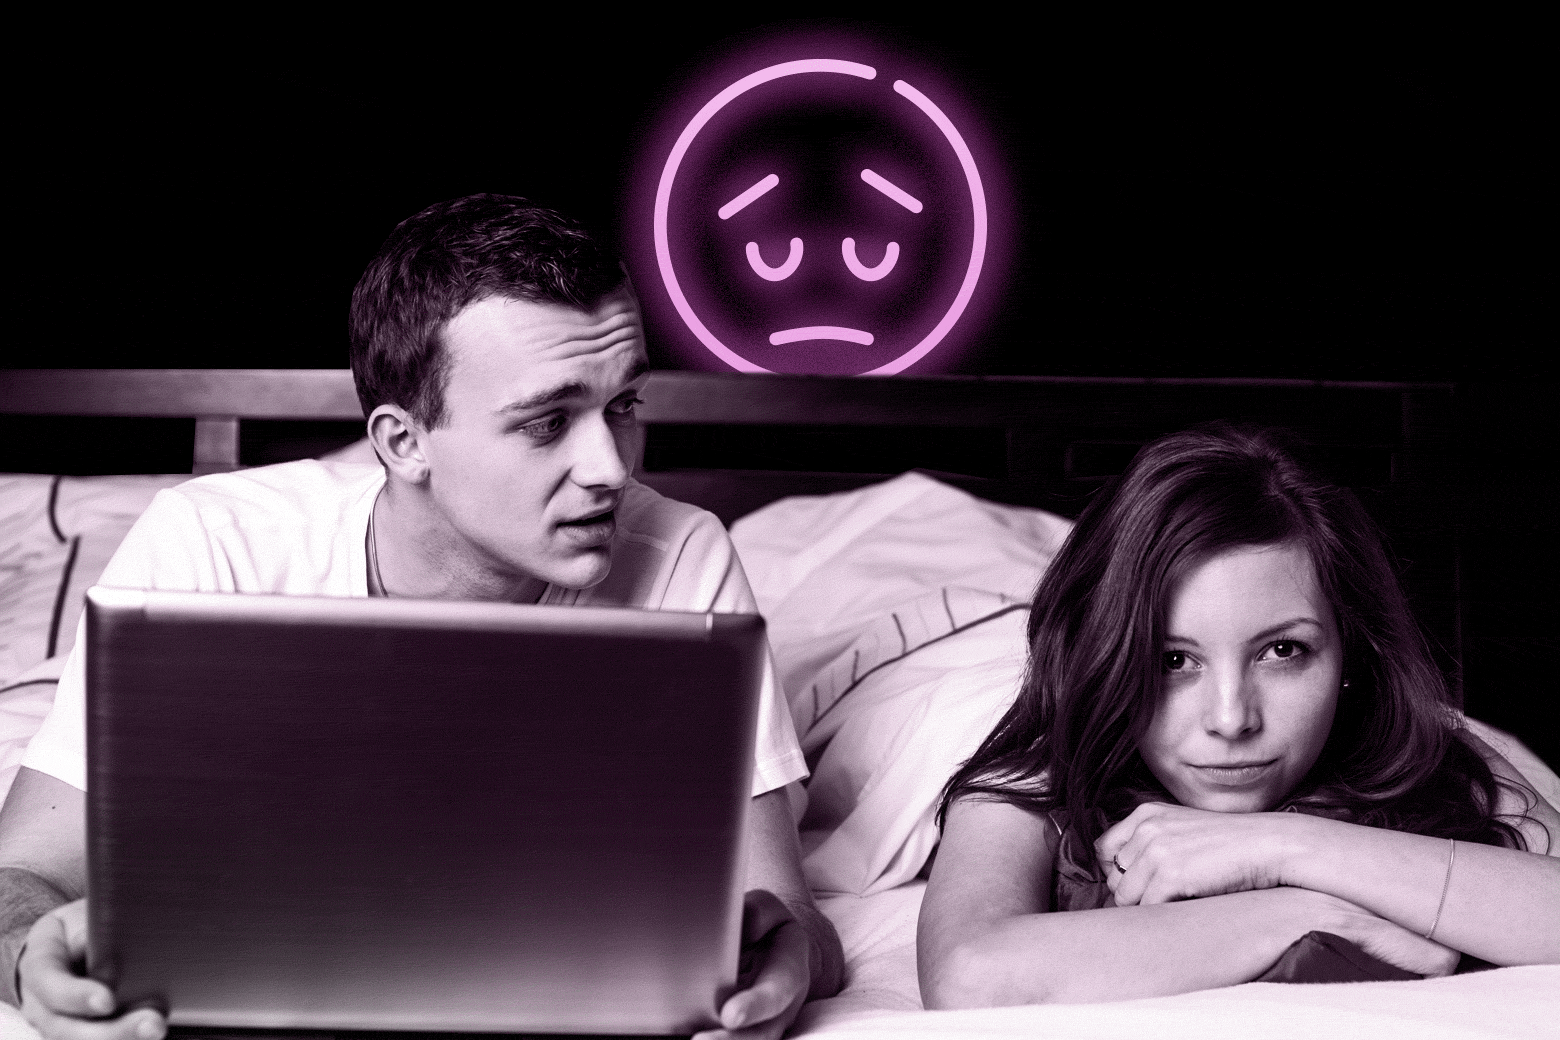 My husband wont stop worrying our sex life will dry